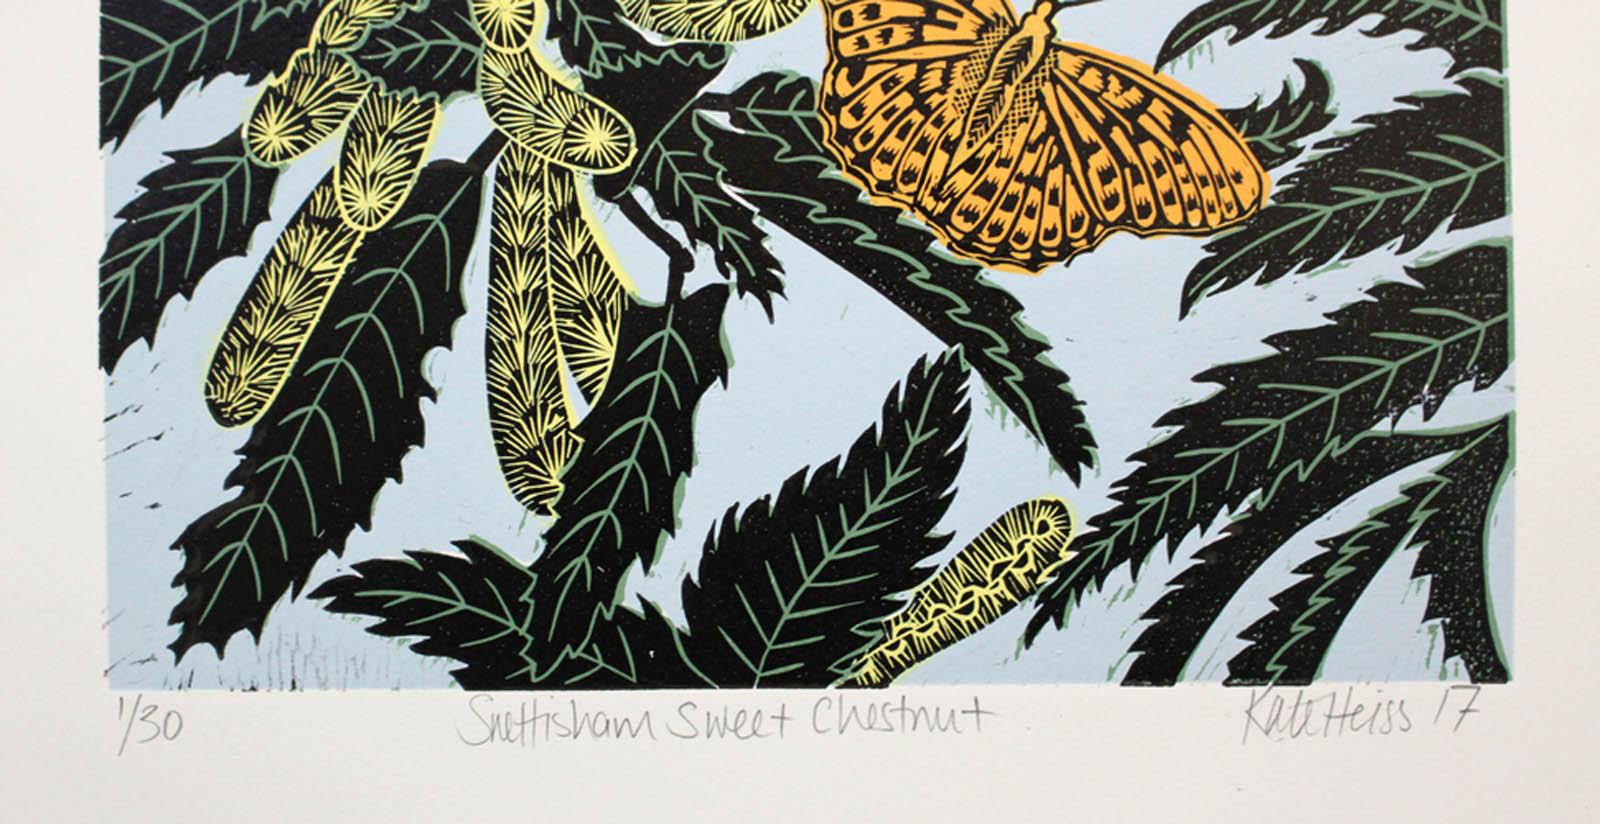 Snettisham Sweet Chestnut, Kate Heiss, Limited edition linocut print, Butterfly For Sale 2